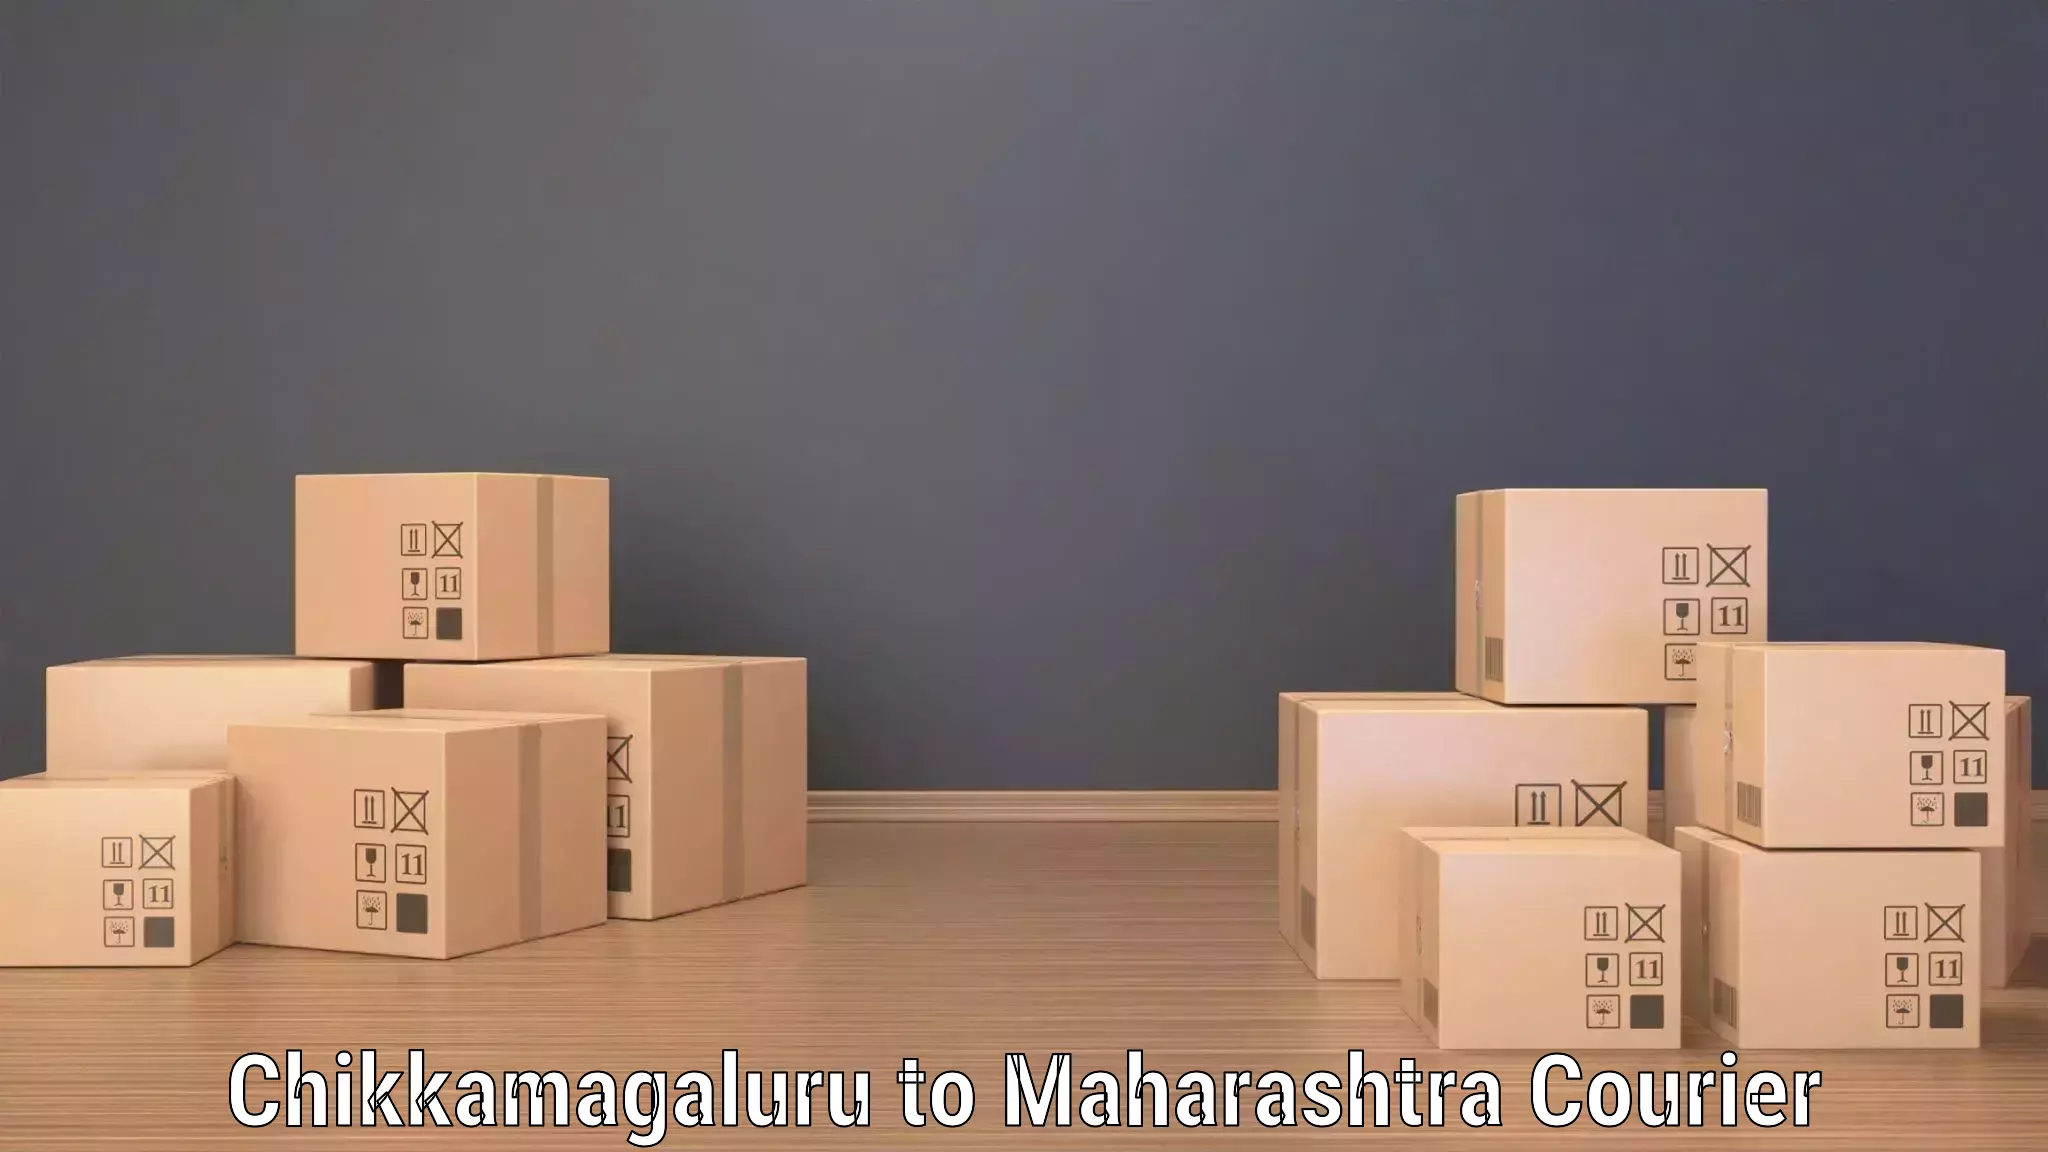 Nationwide delivery network Chikkamagaluru to Loha Nanded